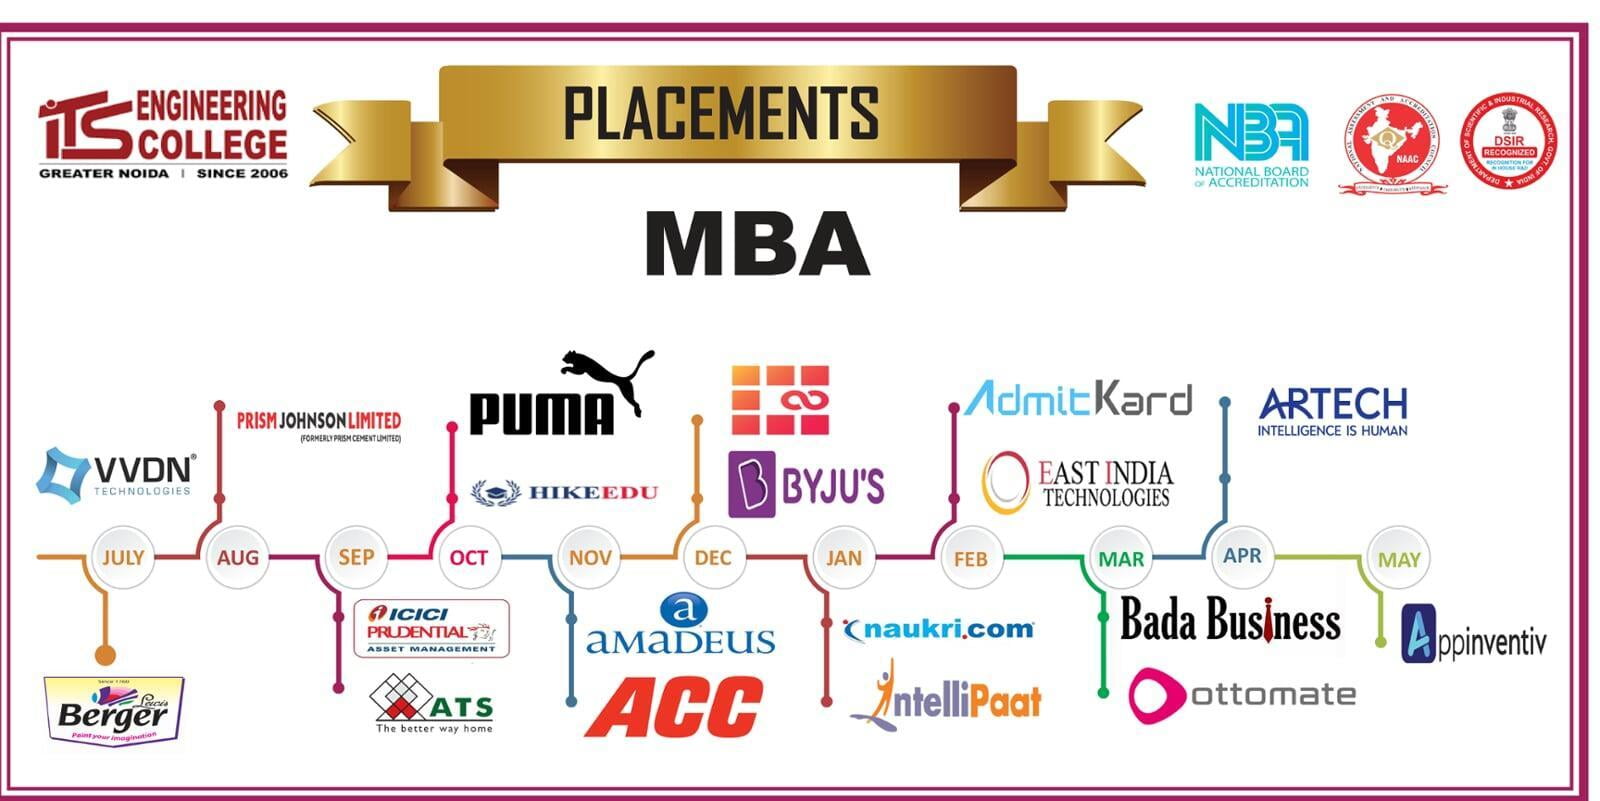 MBA Recruiters 2022 ITS Engineering College